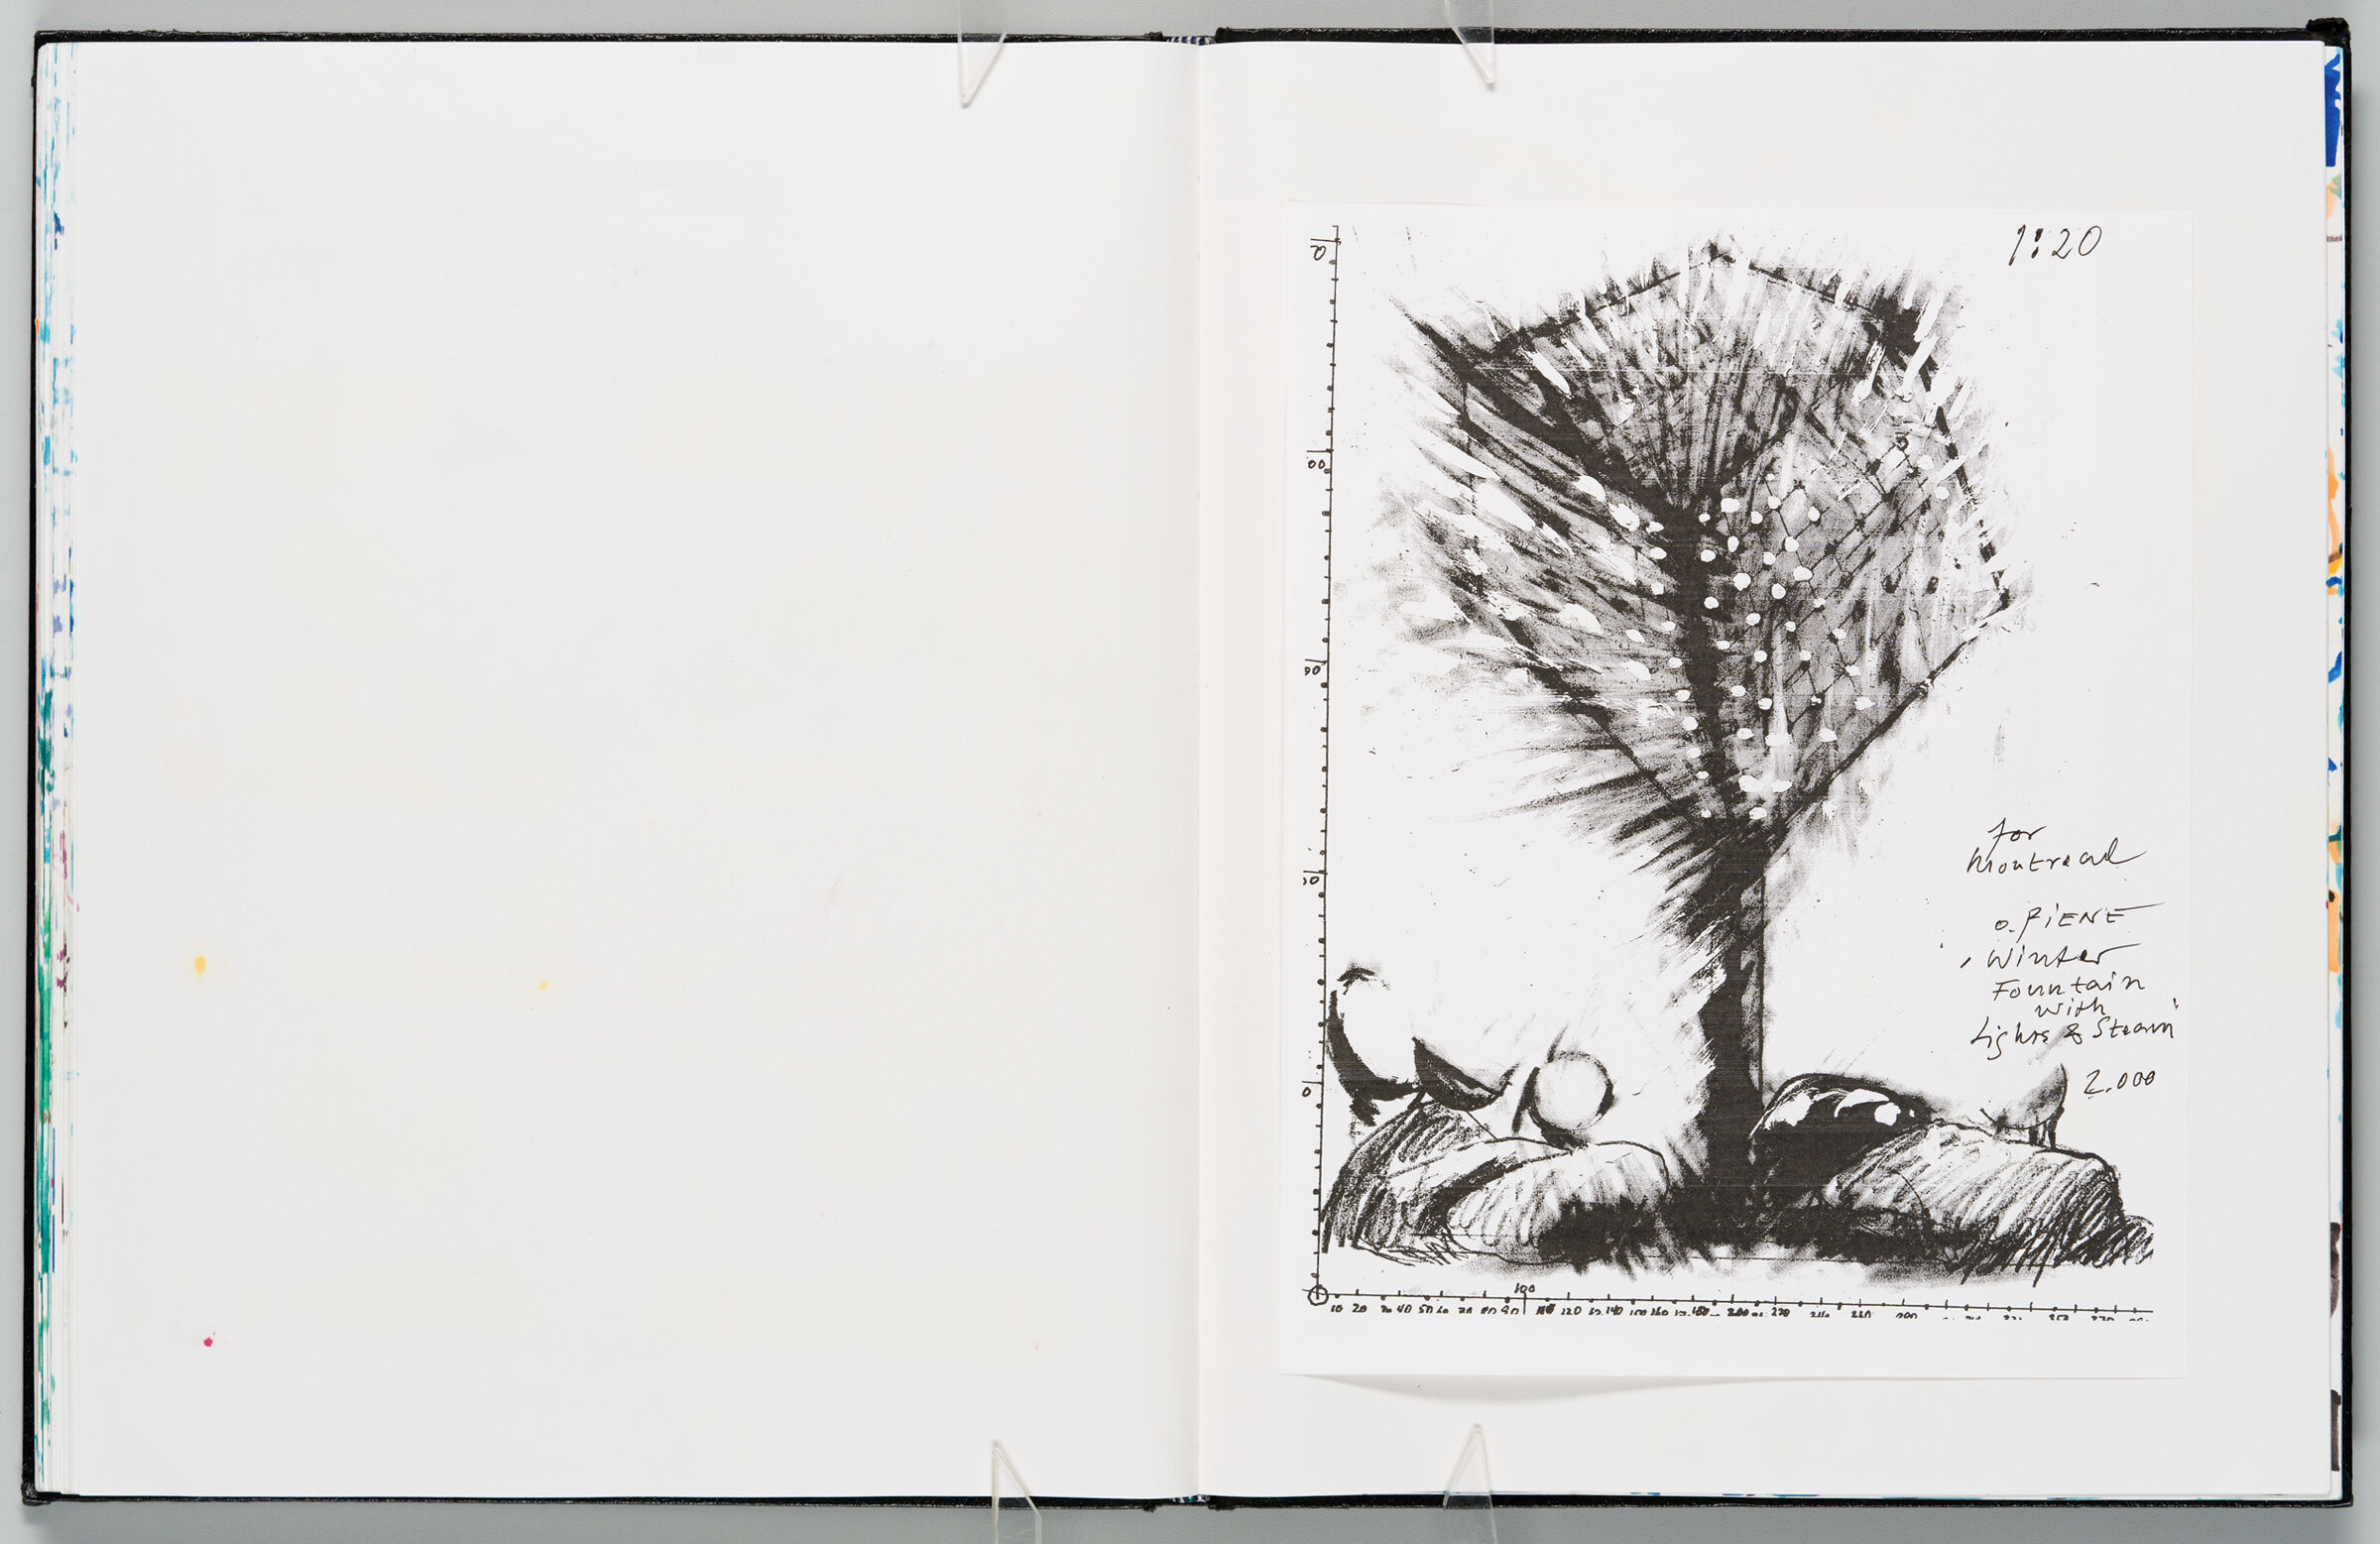 Untitled (Blank, Left Page); Untitled (